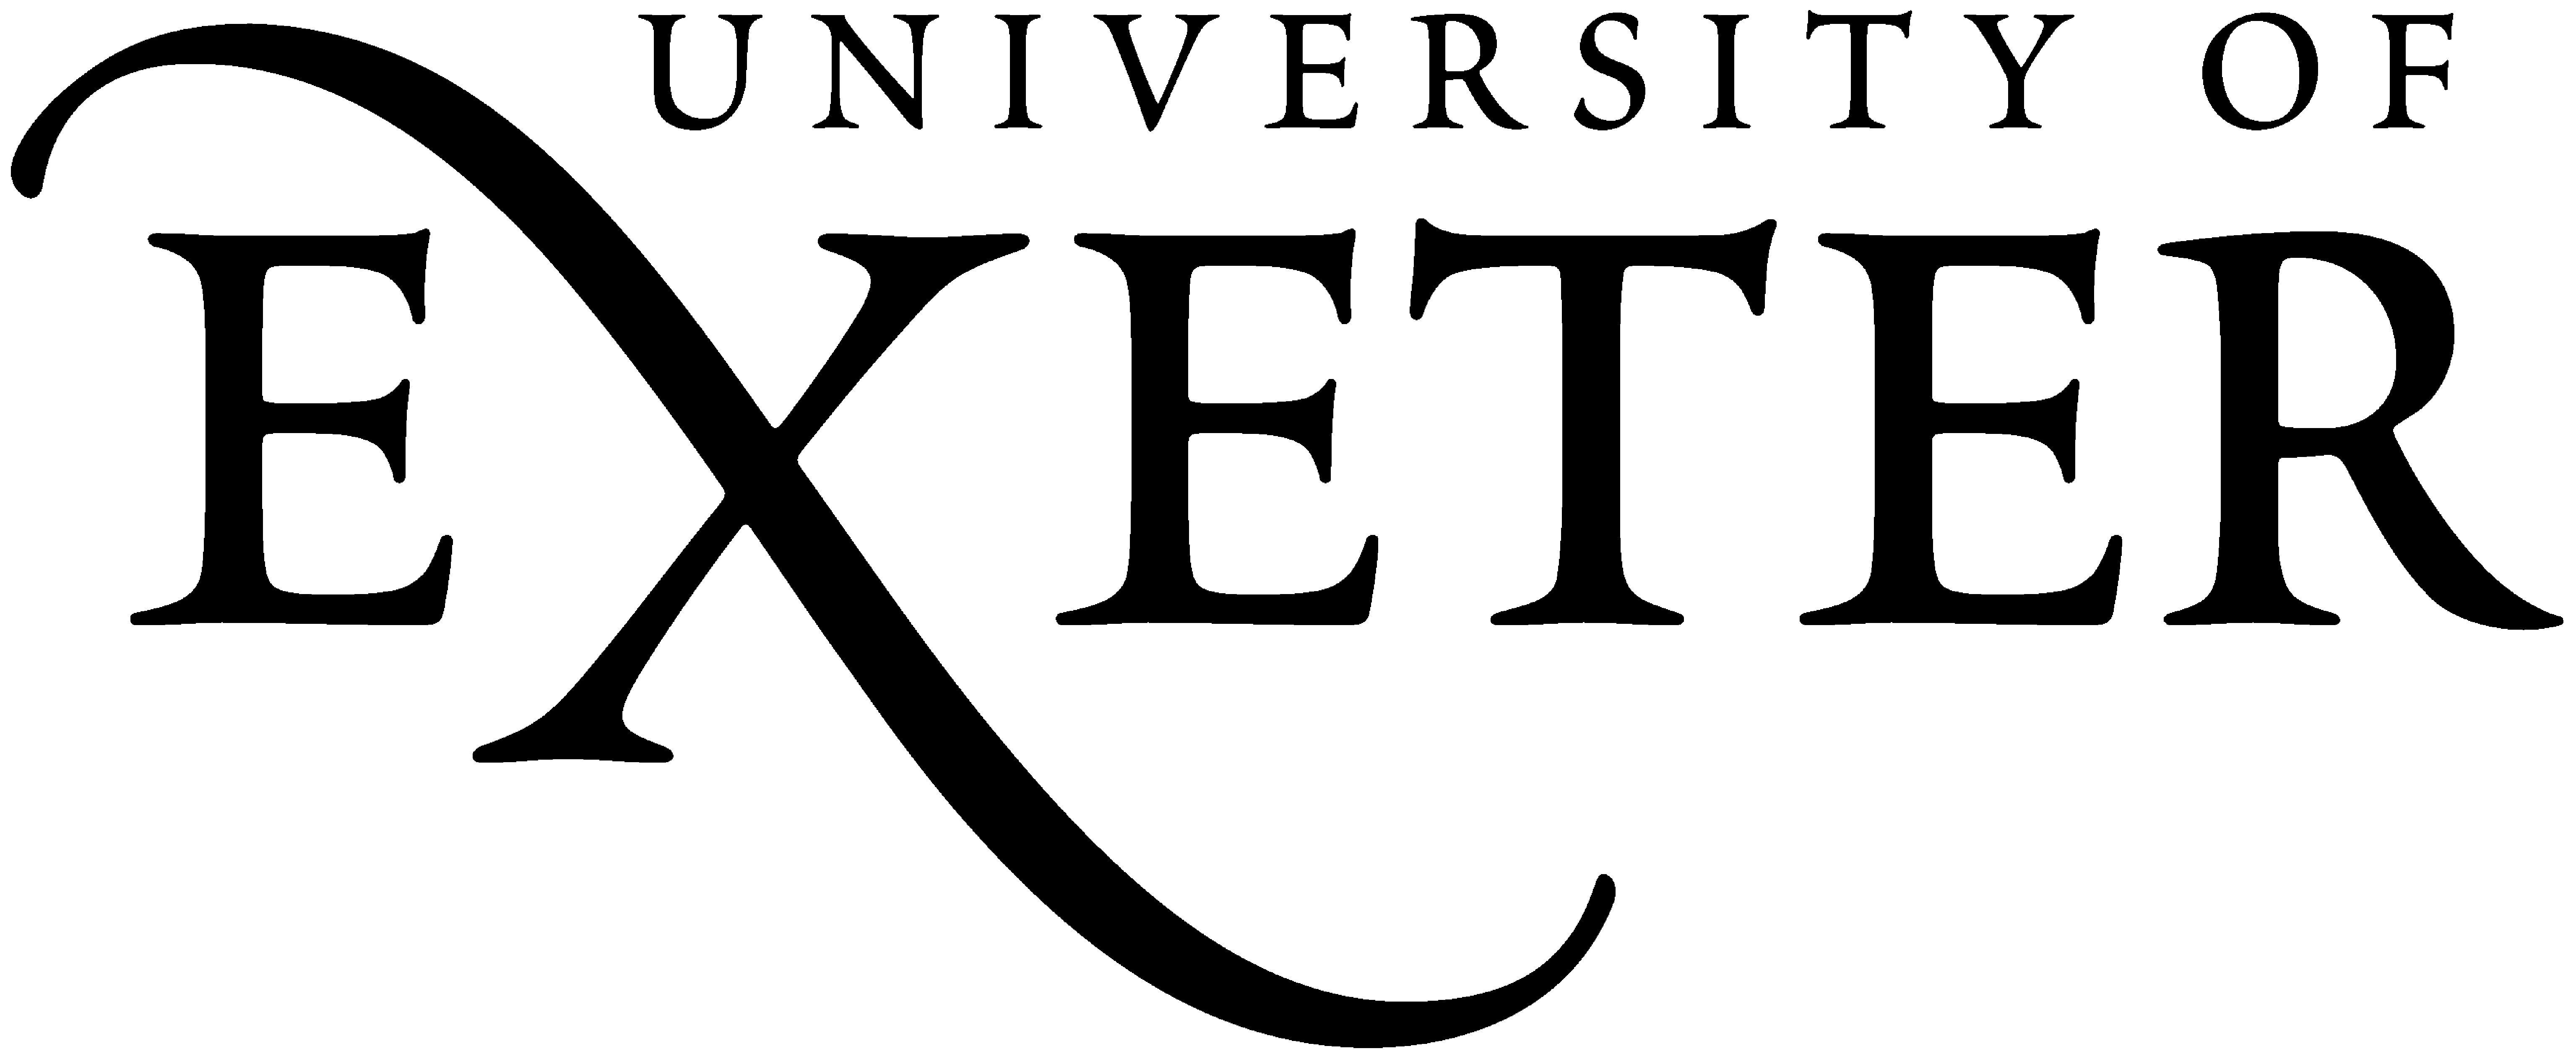 Exeter Logo - Downloads | Communication and Marketing Services | University of Exeter